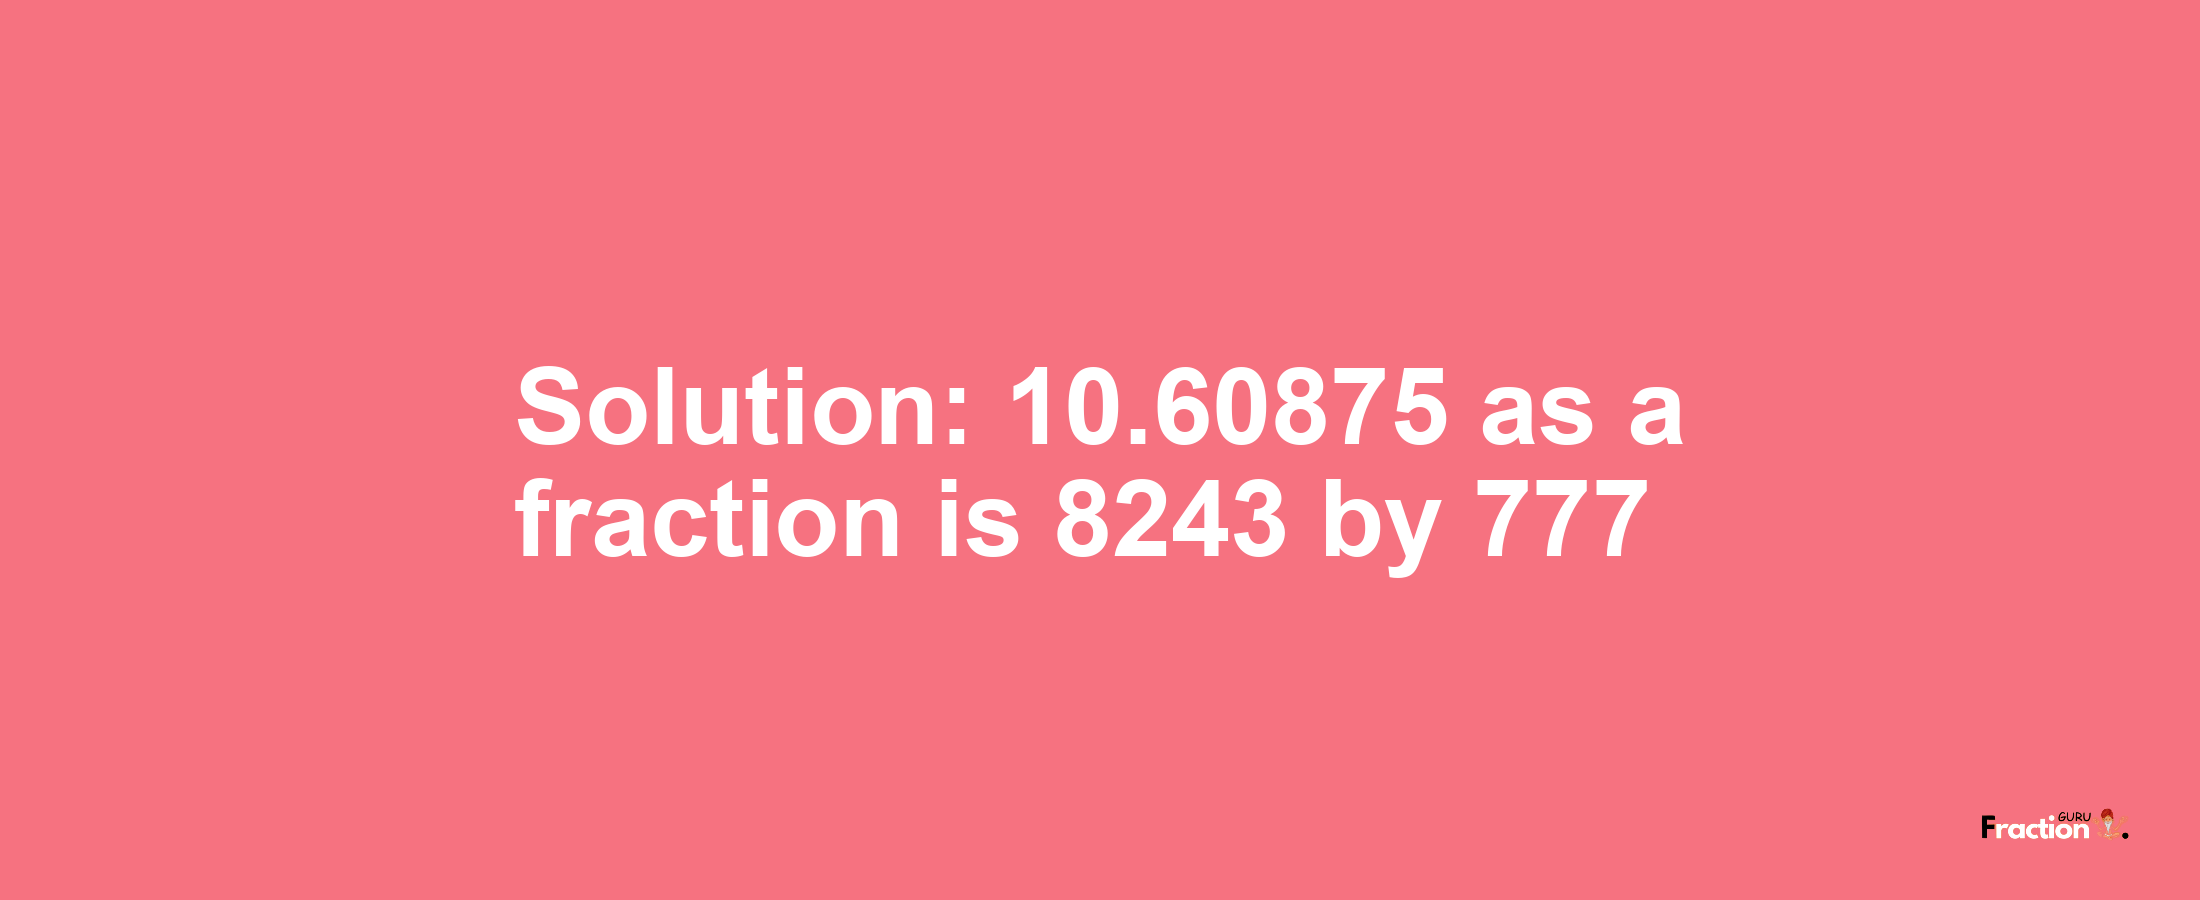 Solution:10.60875 as a fraction is 8243/777